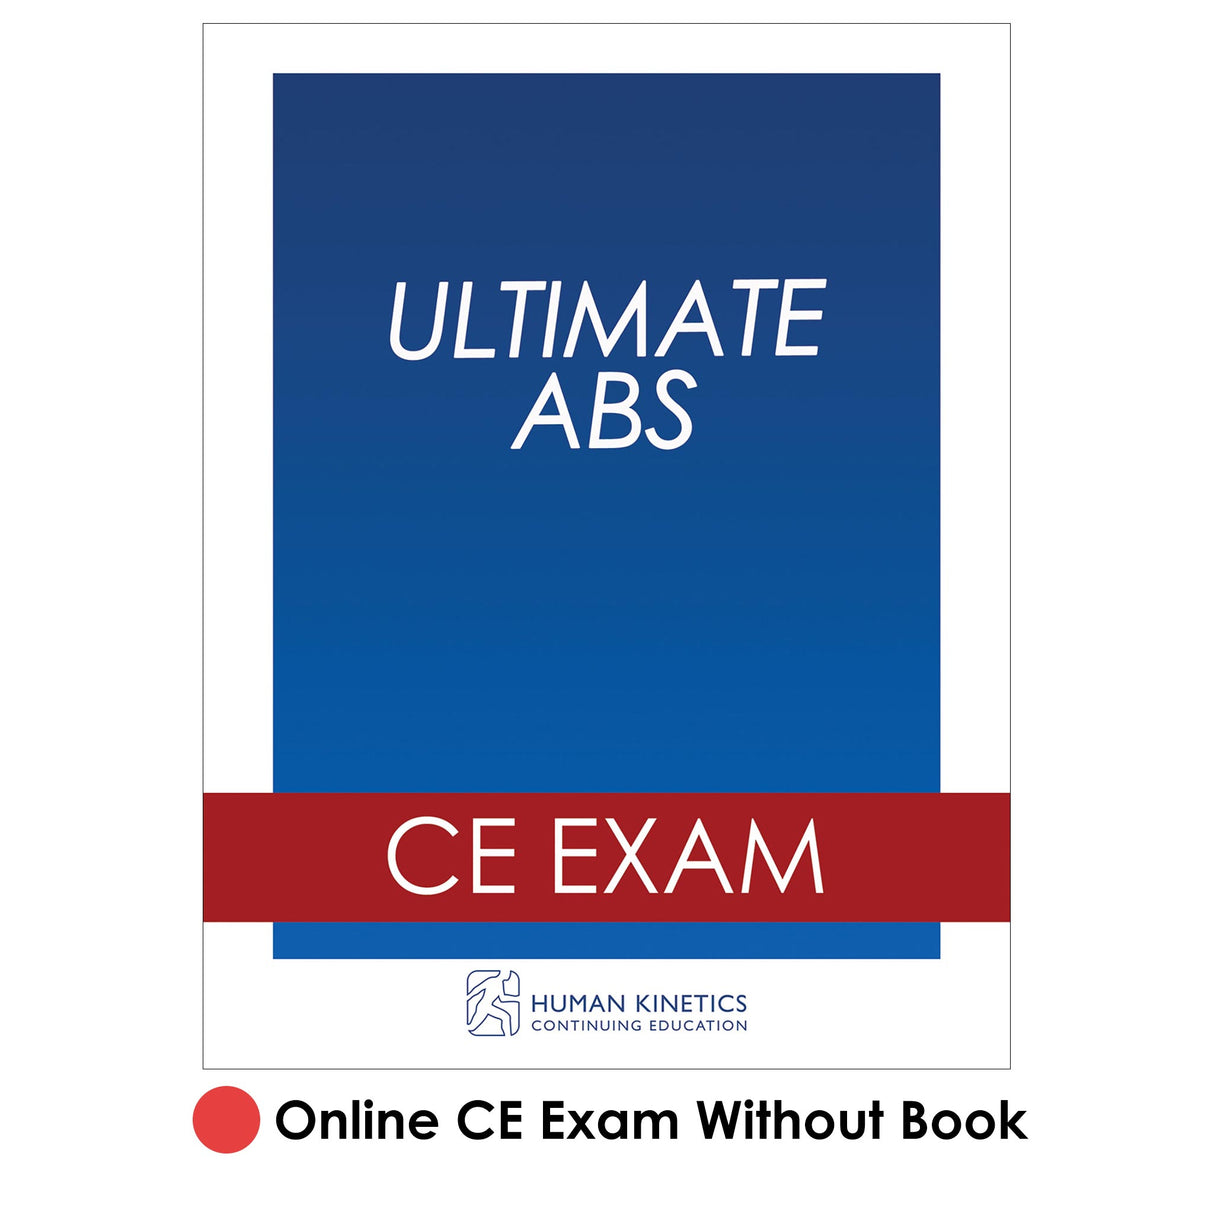 Ultimate Abs Online CE Exam Without Book